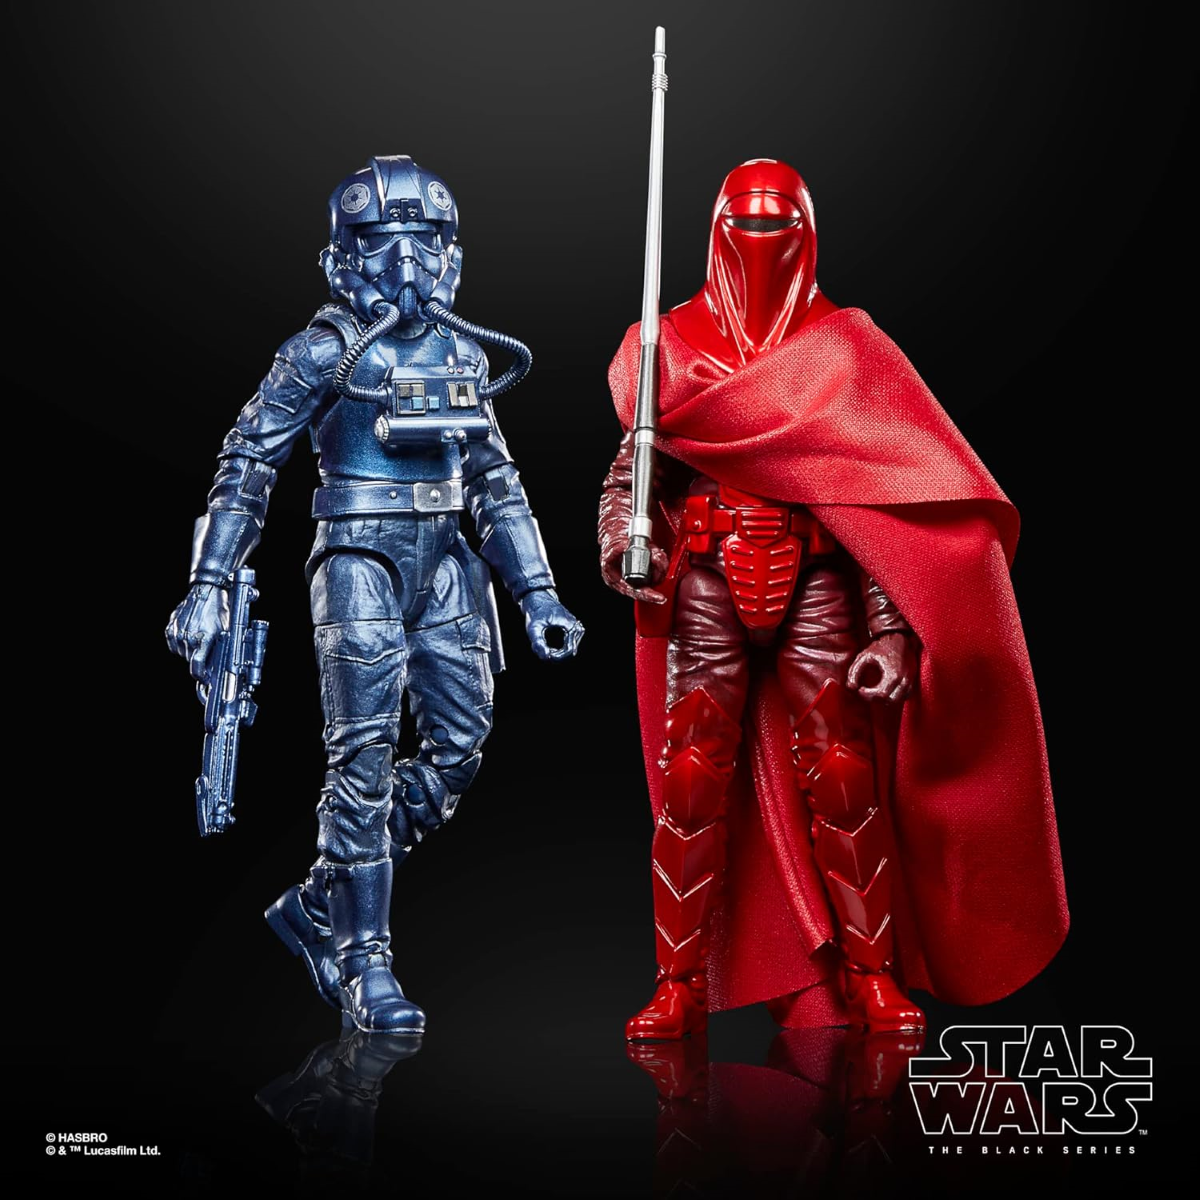 Star Wars The Black Series Carbonized Edition  - Emperor Guard & TIE Pilot - 2-Pack  15cm Pack F70115S0 5010996108500